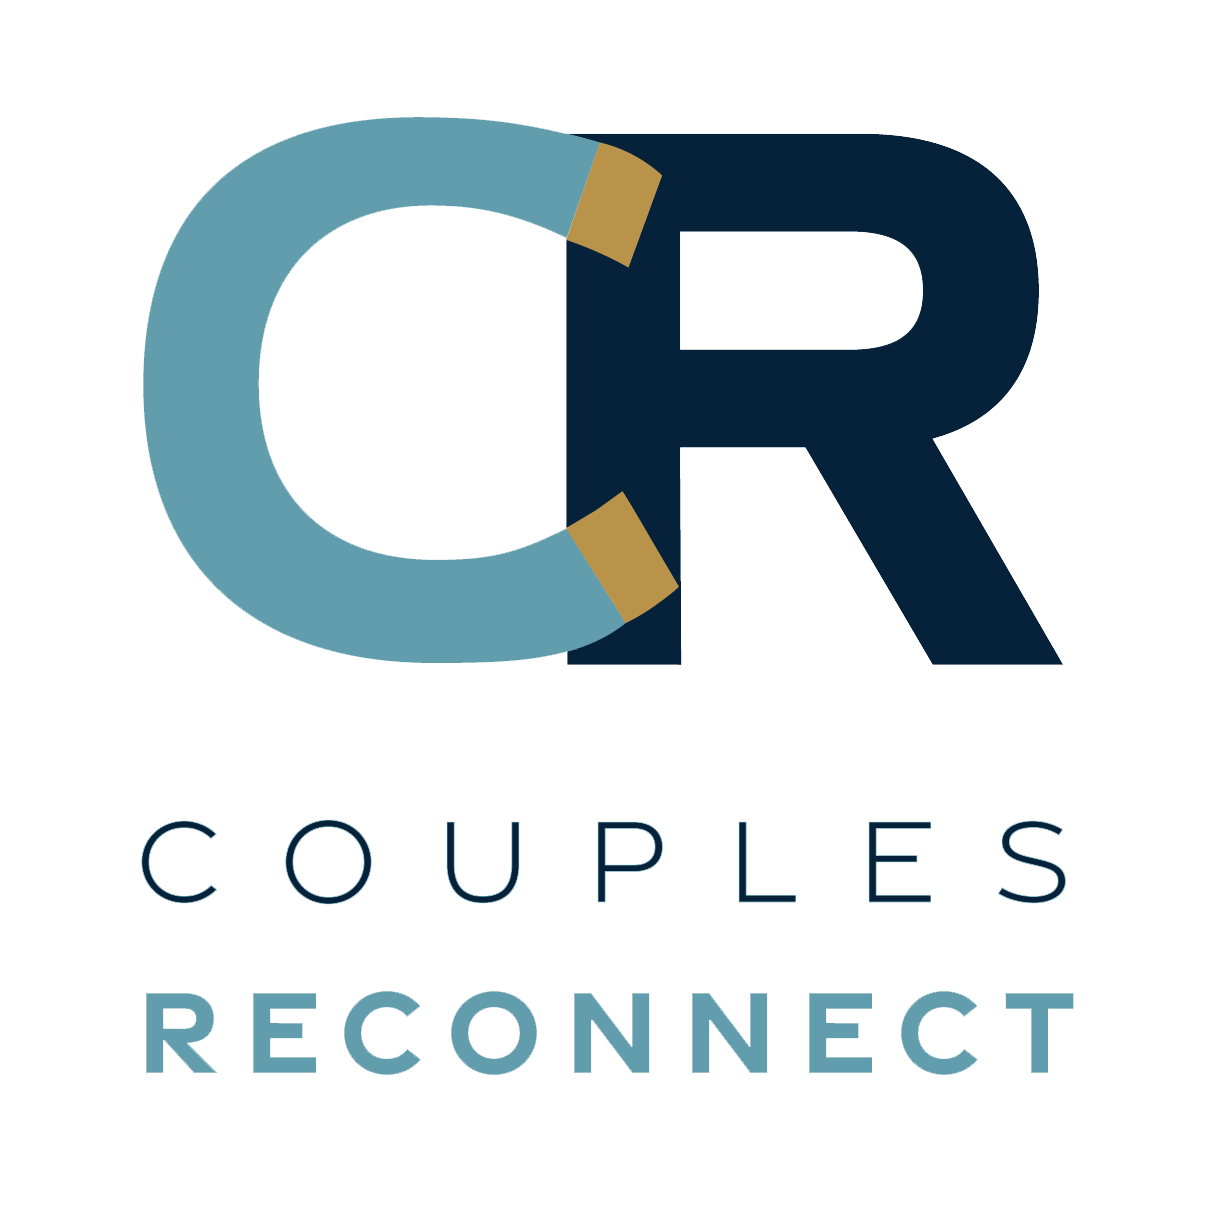 Couples Reconnect logo.